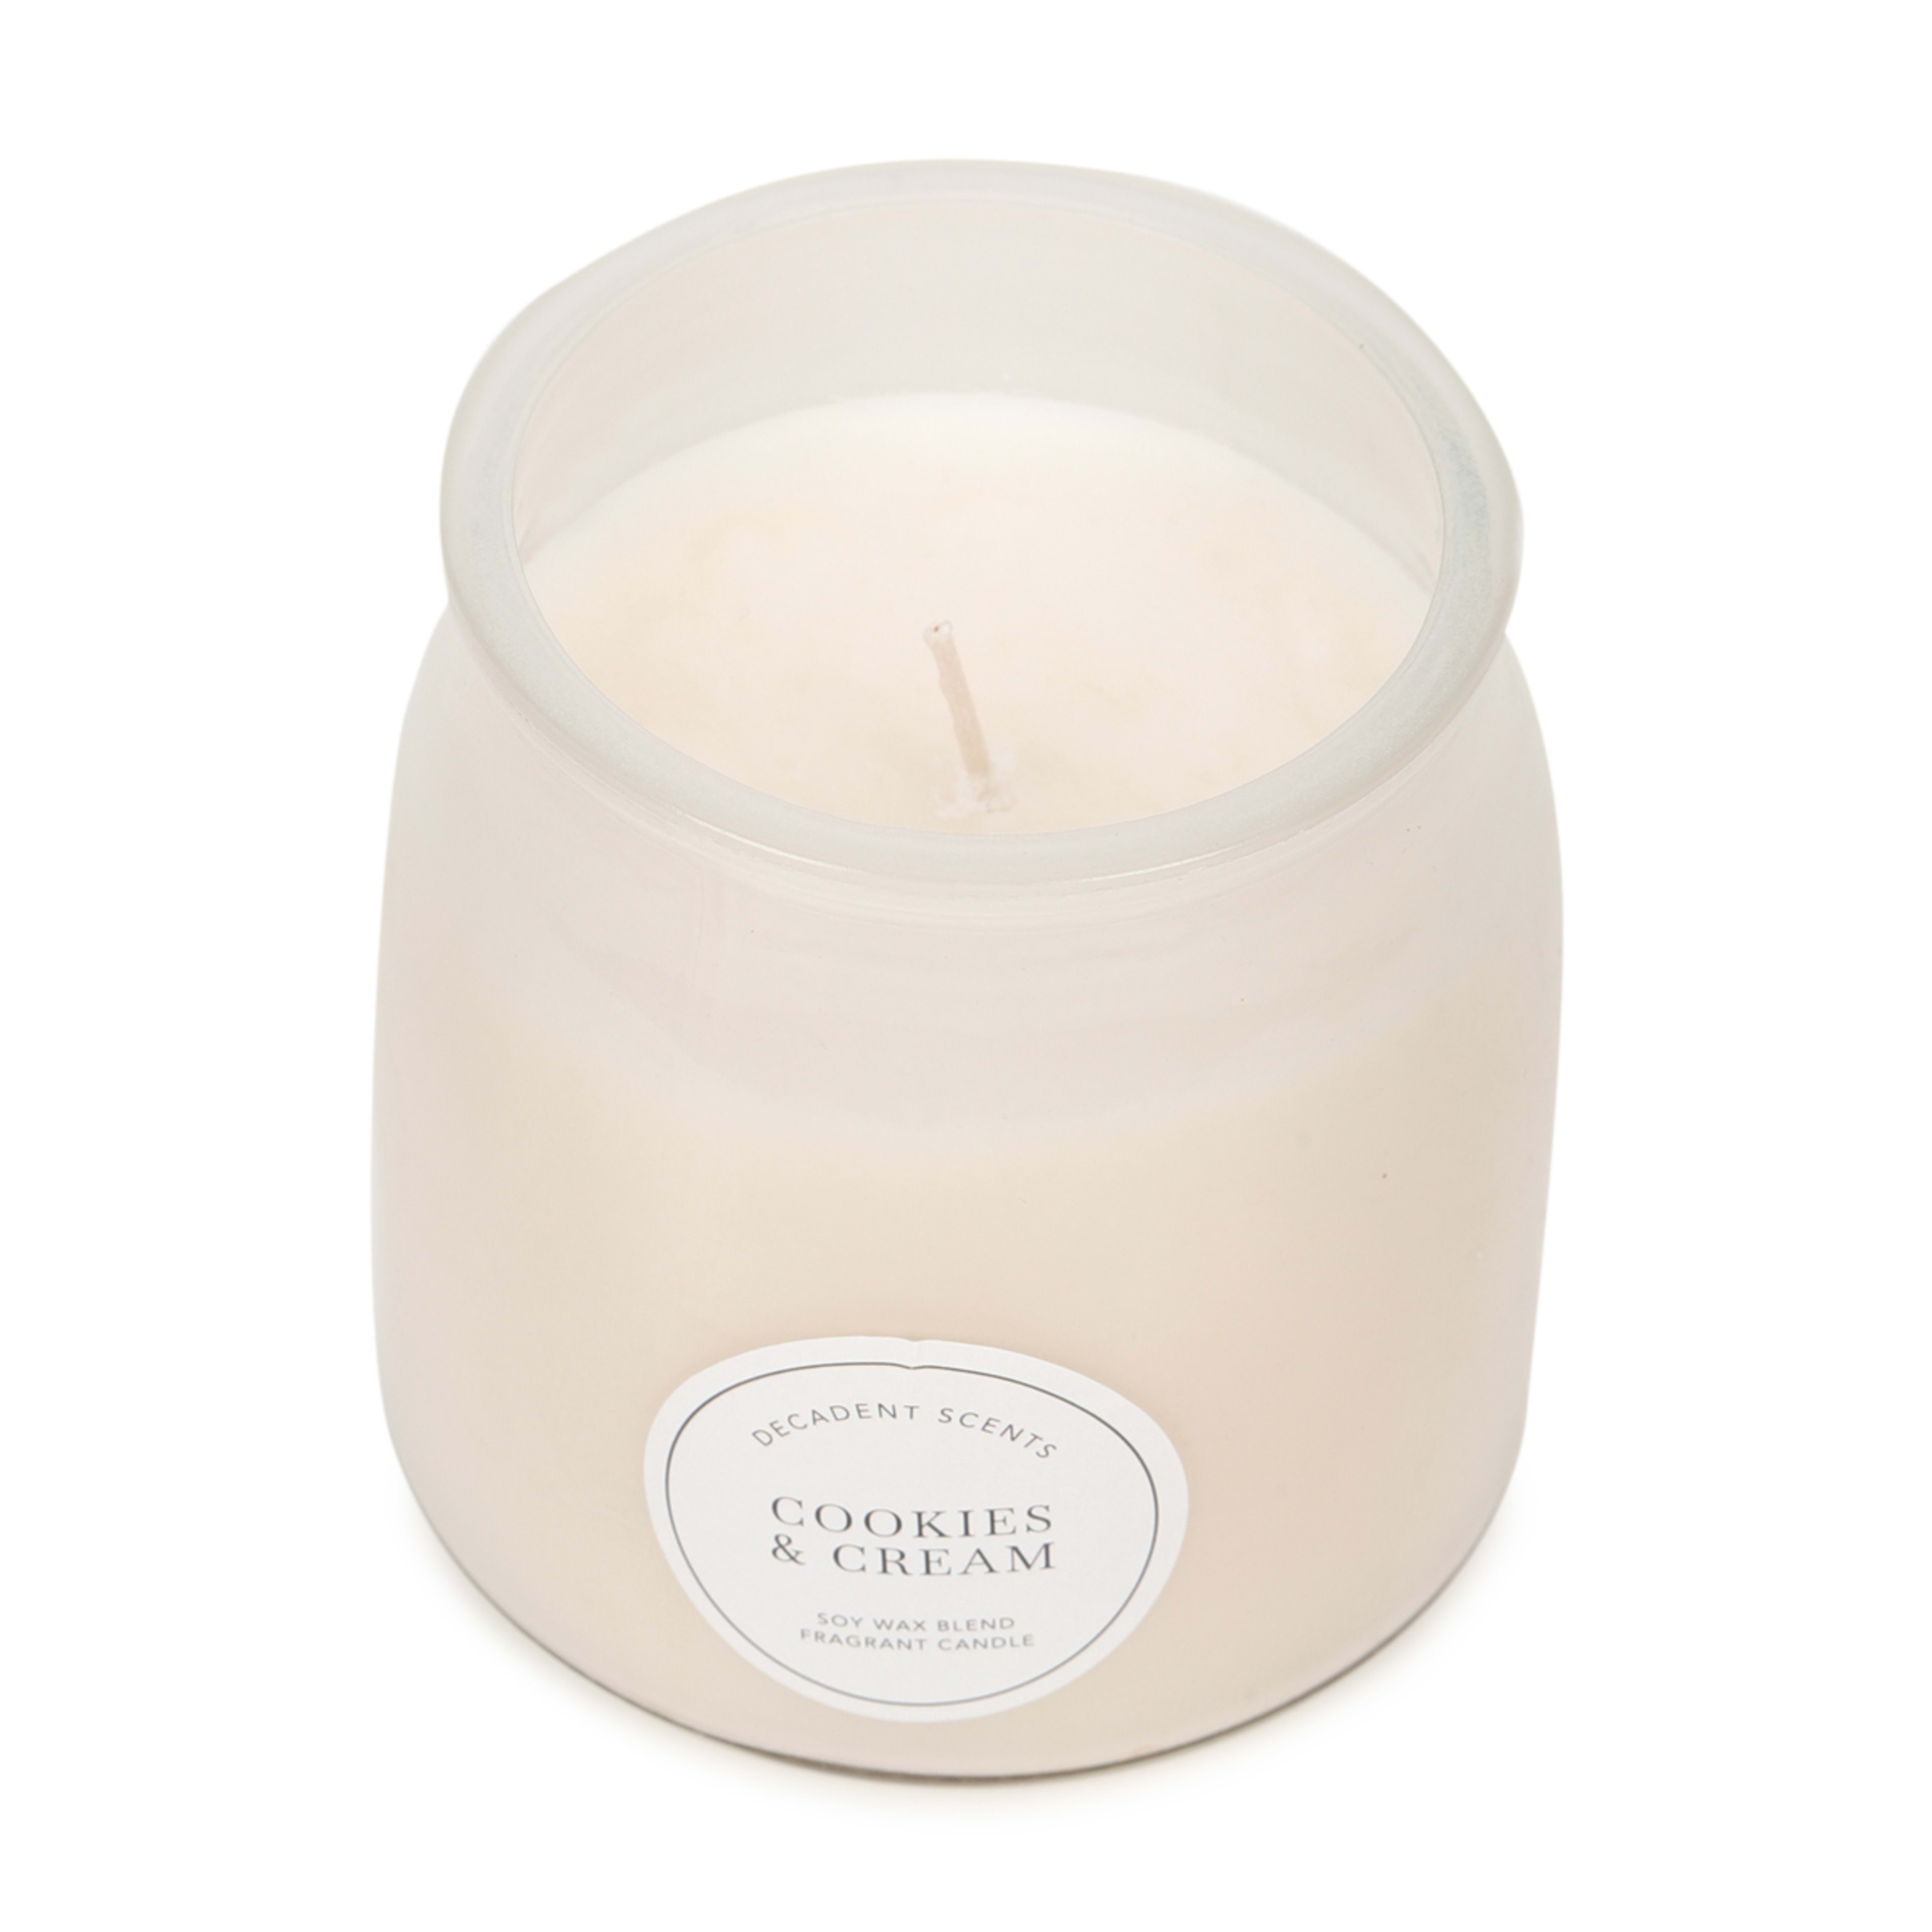 Cookies and Cream Decadent Scents Soy Wax Blend Fragrant Candle - Kmart